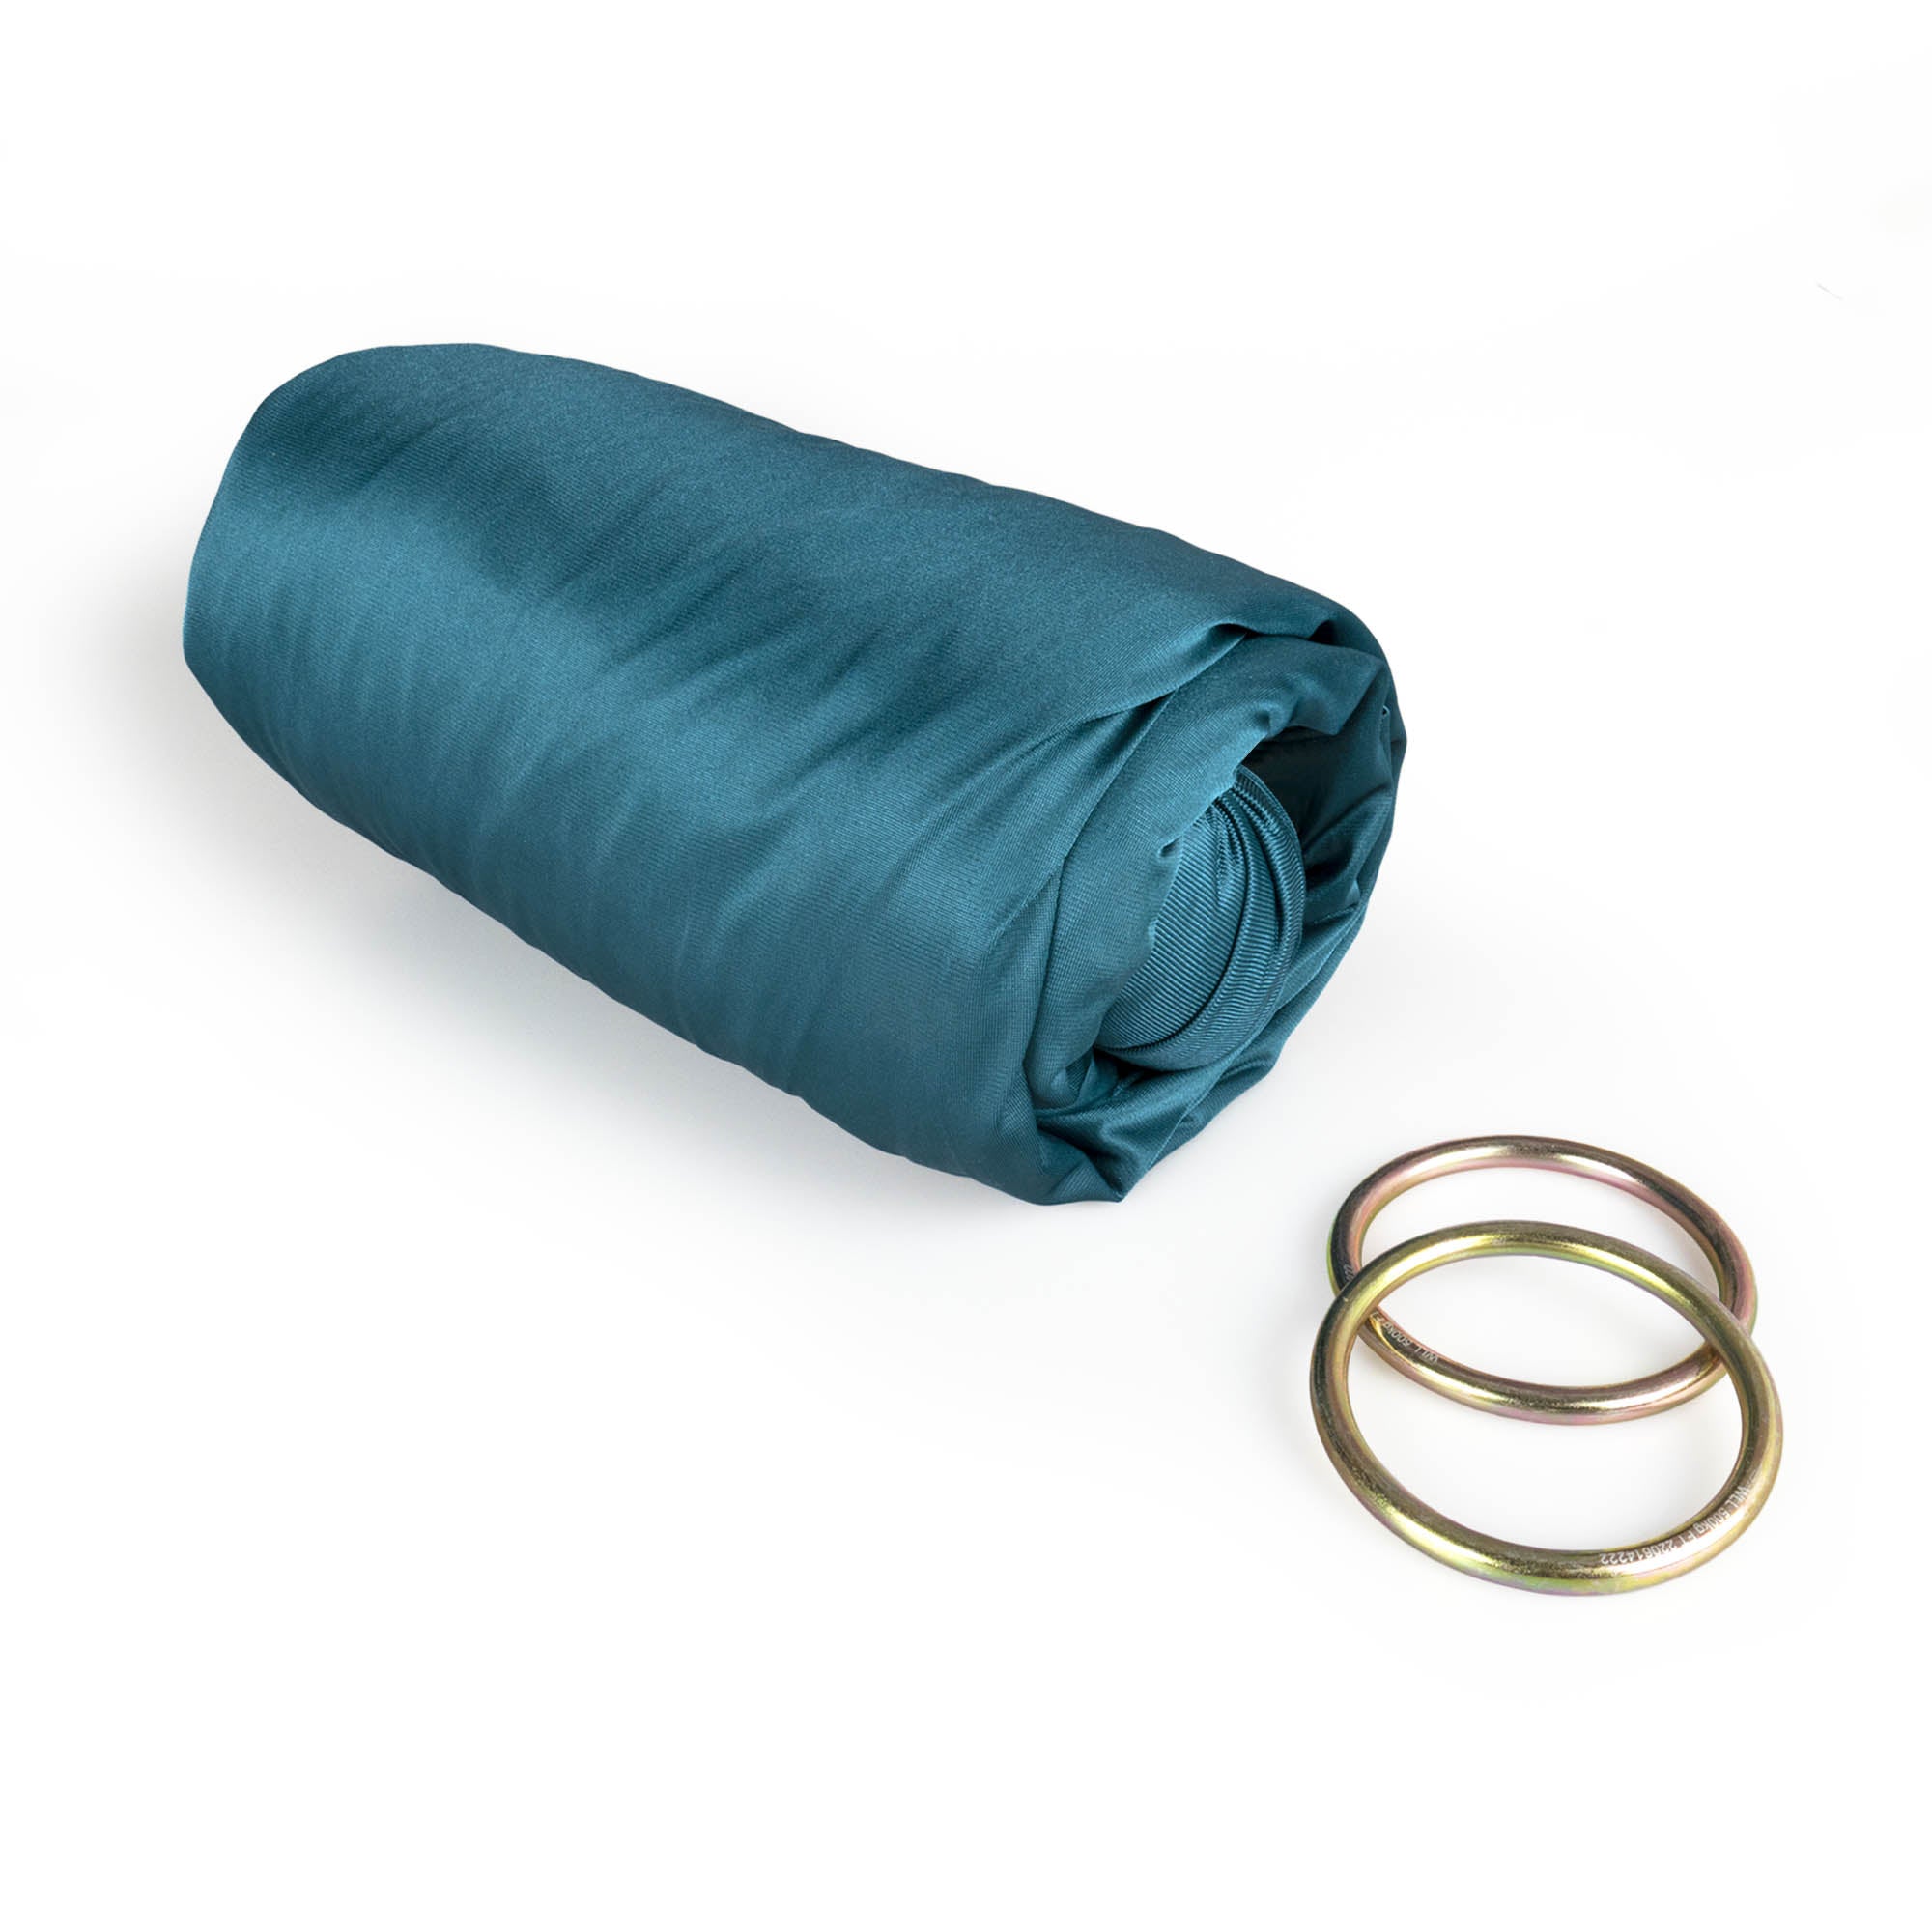 Pine green yoga hammock rolled up with ring dettached